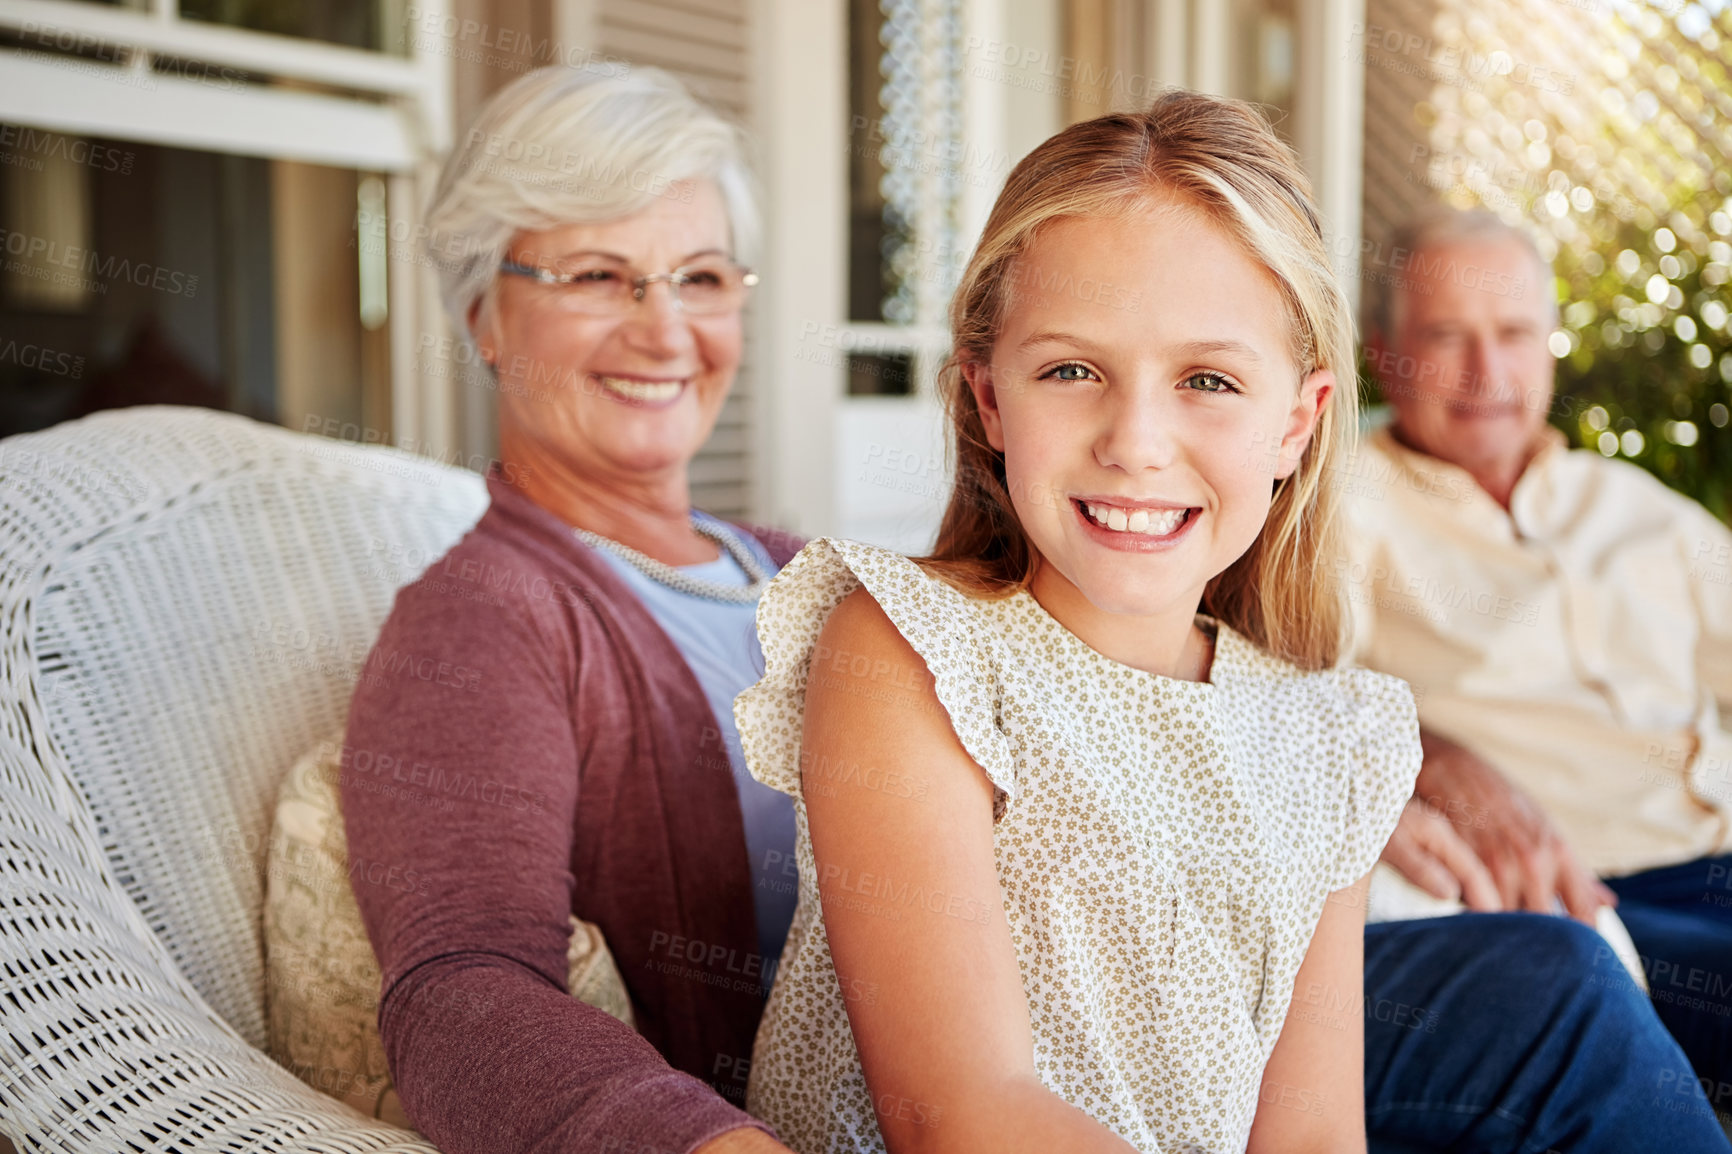 Buy stock photo Cropped portrait of a young girl sitting outside with her grandparents